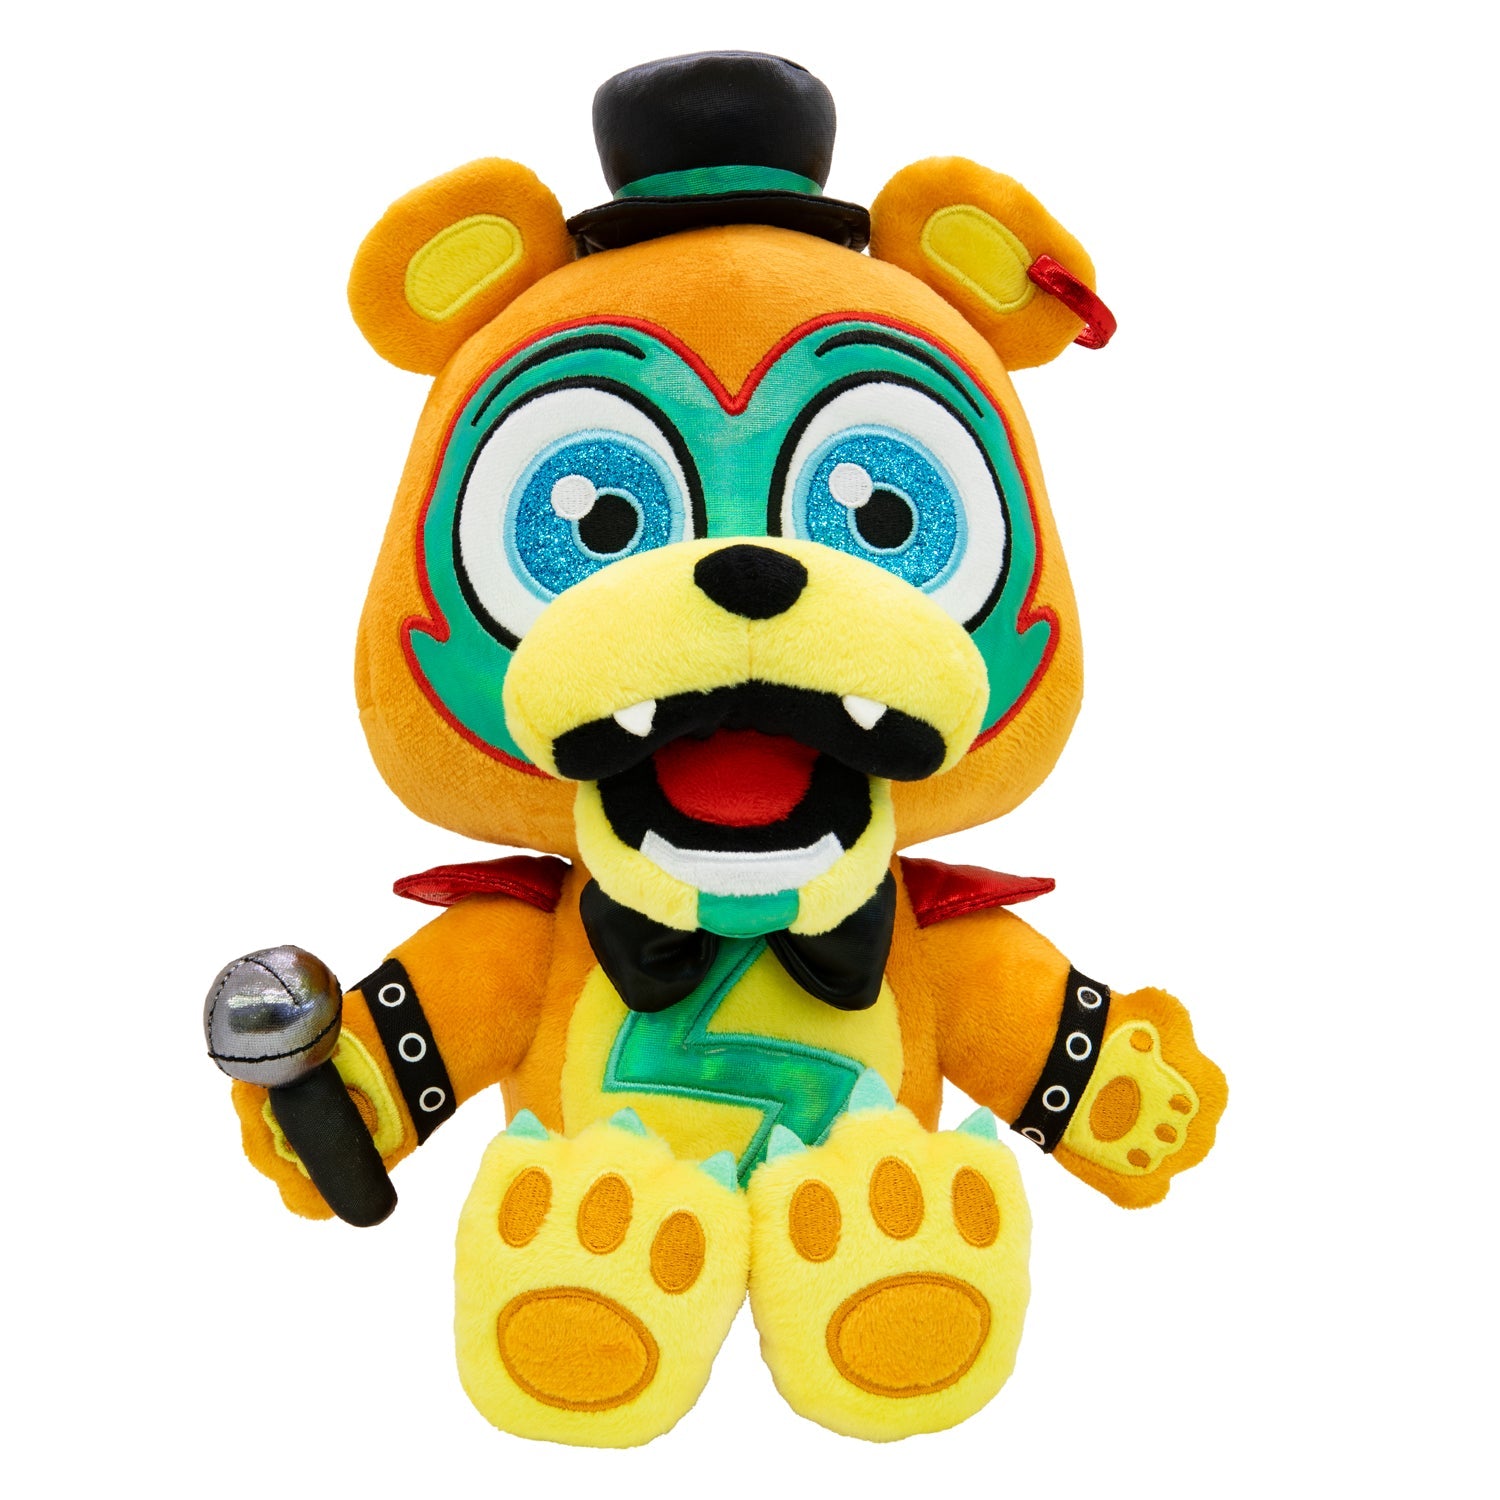 Five Nights at Freddy's - Glamrock Freddy Collector's Plush